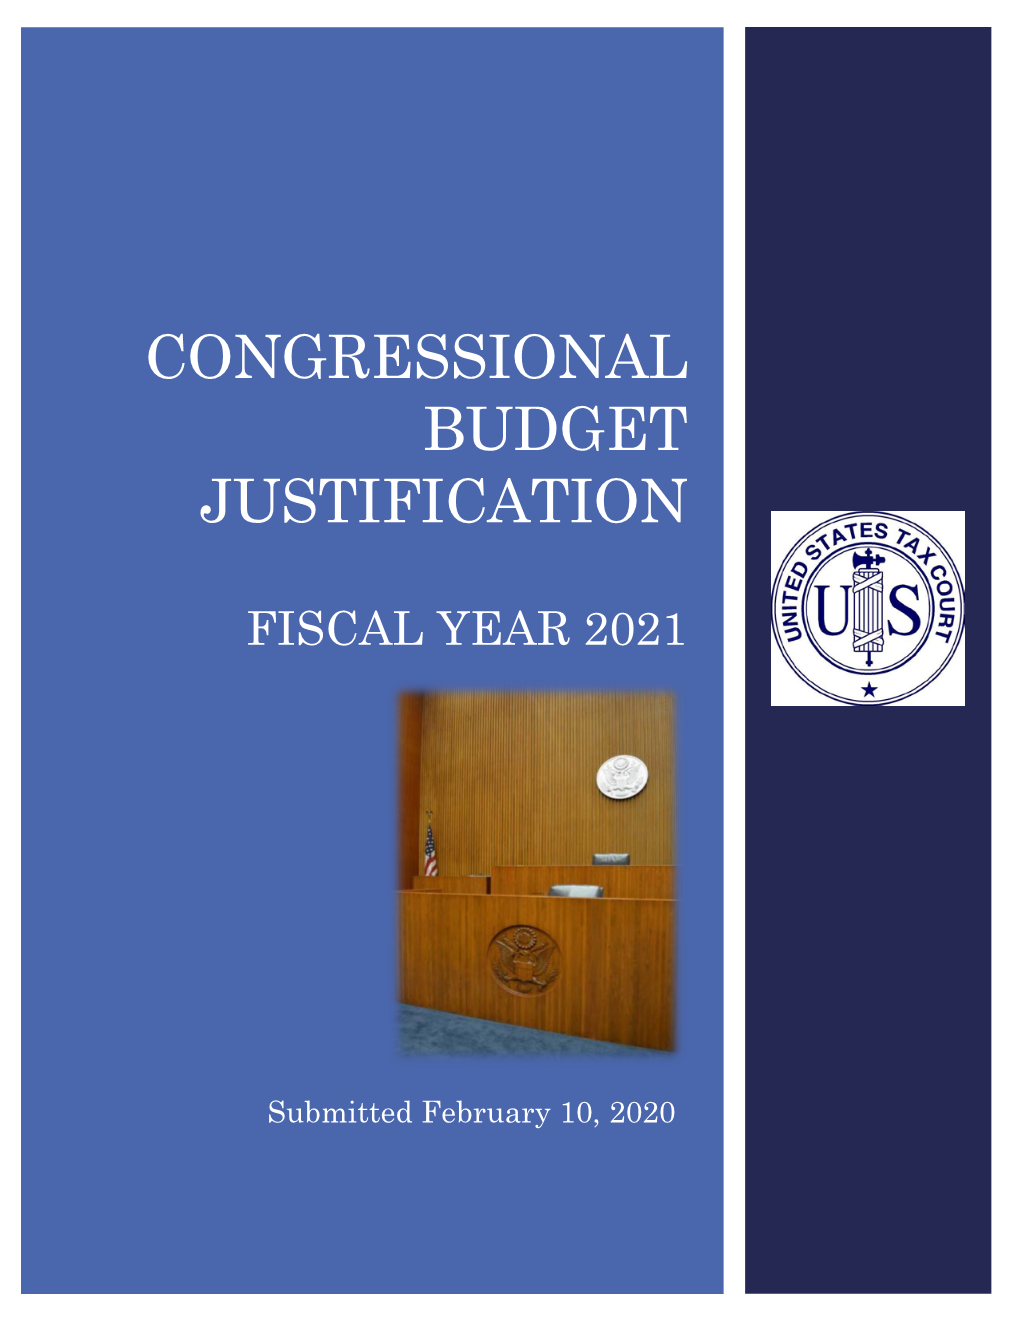 FY 2021 Congressional Budget Justification